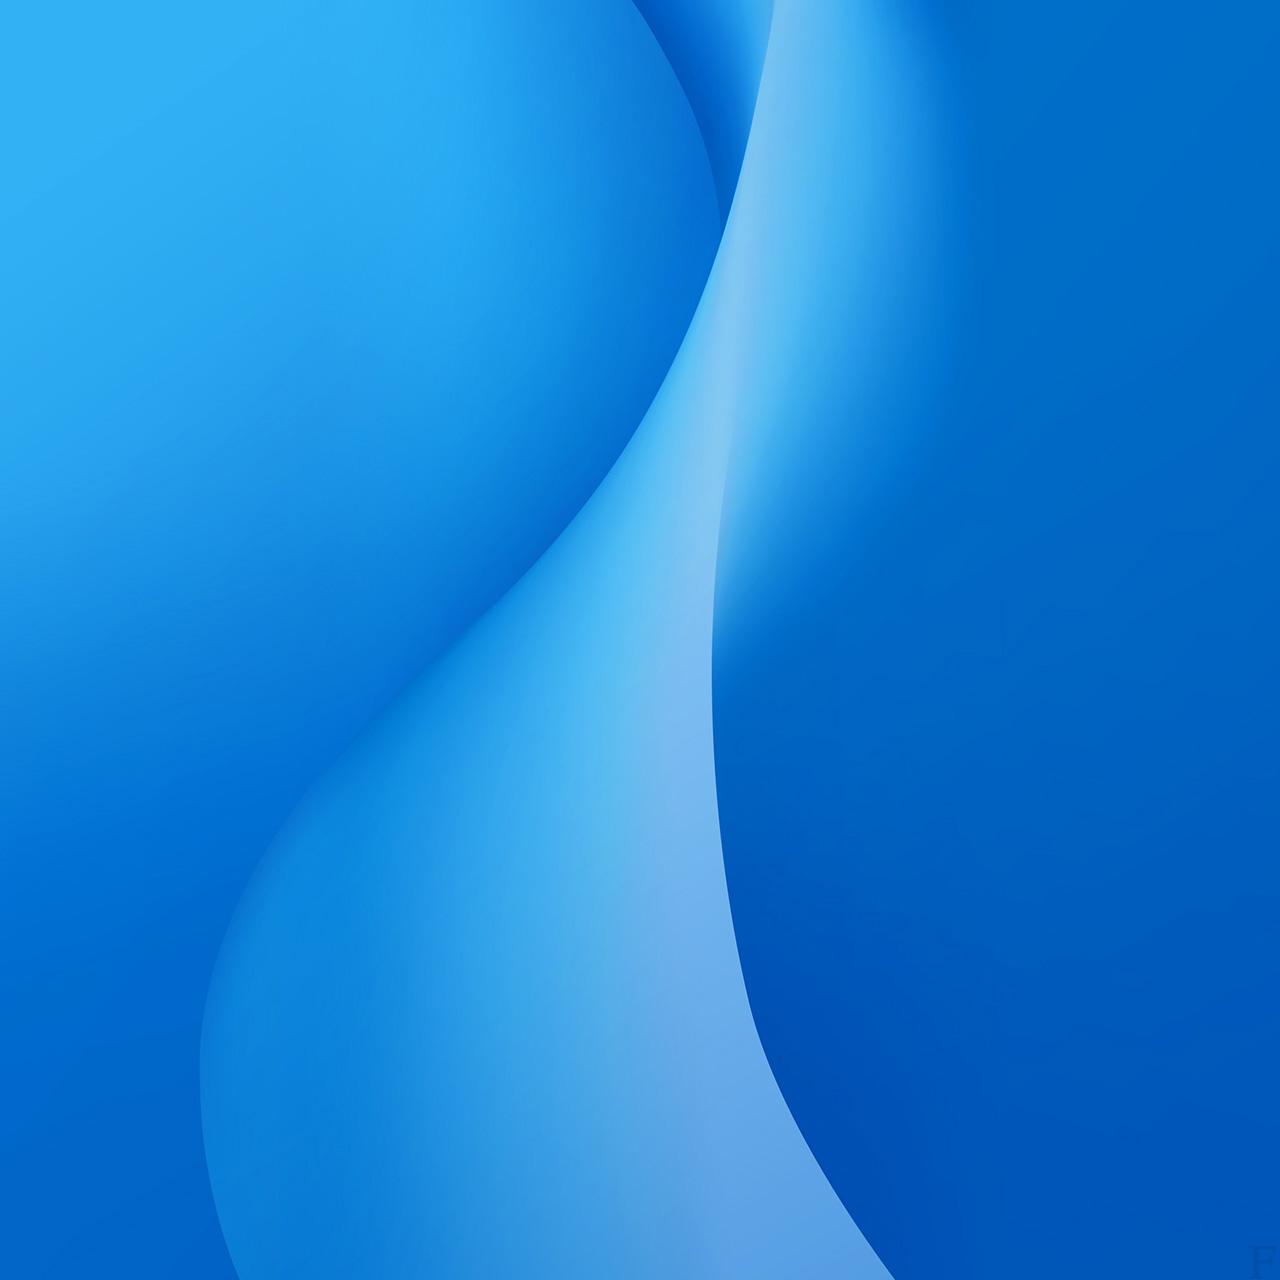 J7,J5 Samsung Wallpapers APK  for Android – Download J7,J5 Samsung  Wallpapers APK Latest Version from 